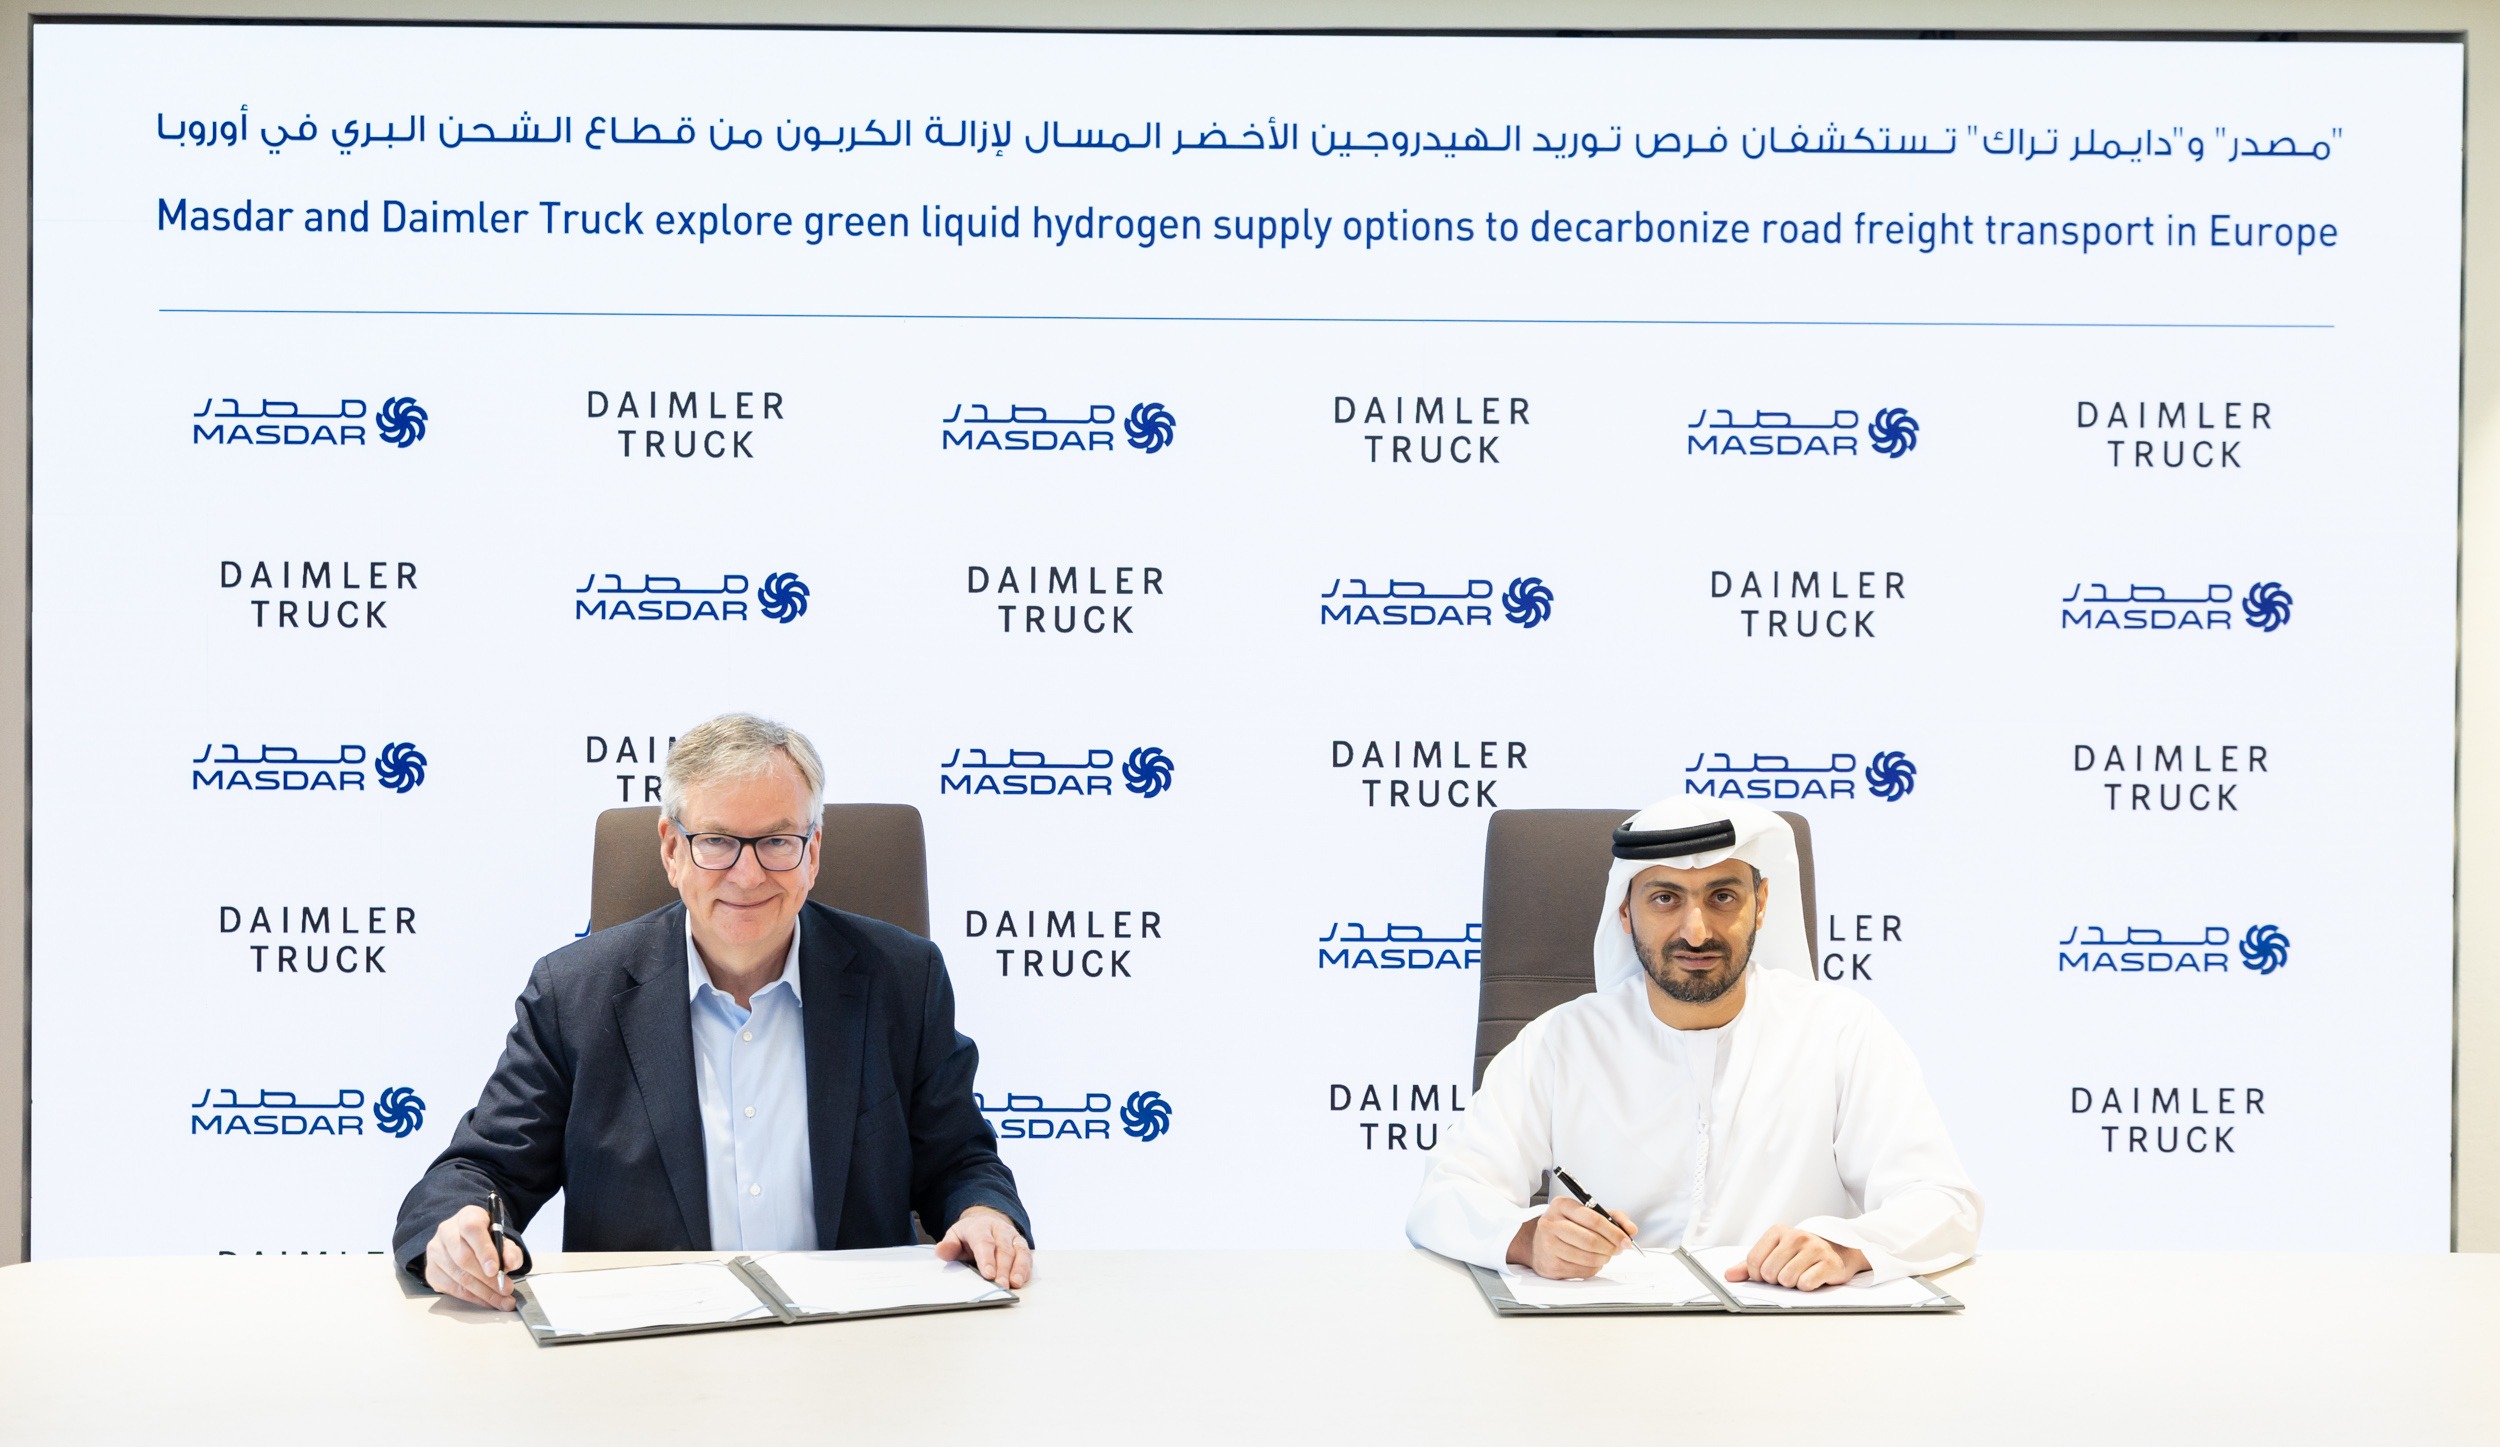 Martin Daum, Chairman of the Board of Management and CEO of Daimler Truck Fawaz Al Muharrami, Deputy Chief Operating Officer (COO) of Masdar